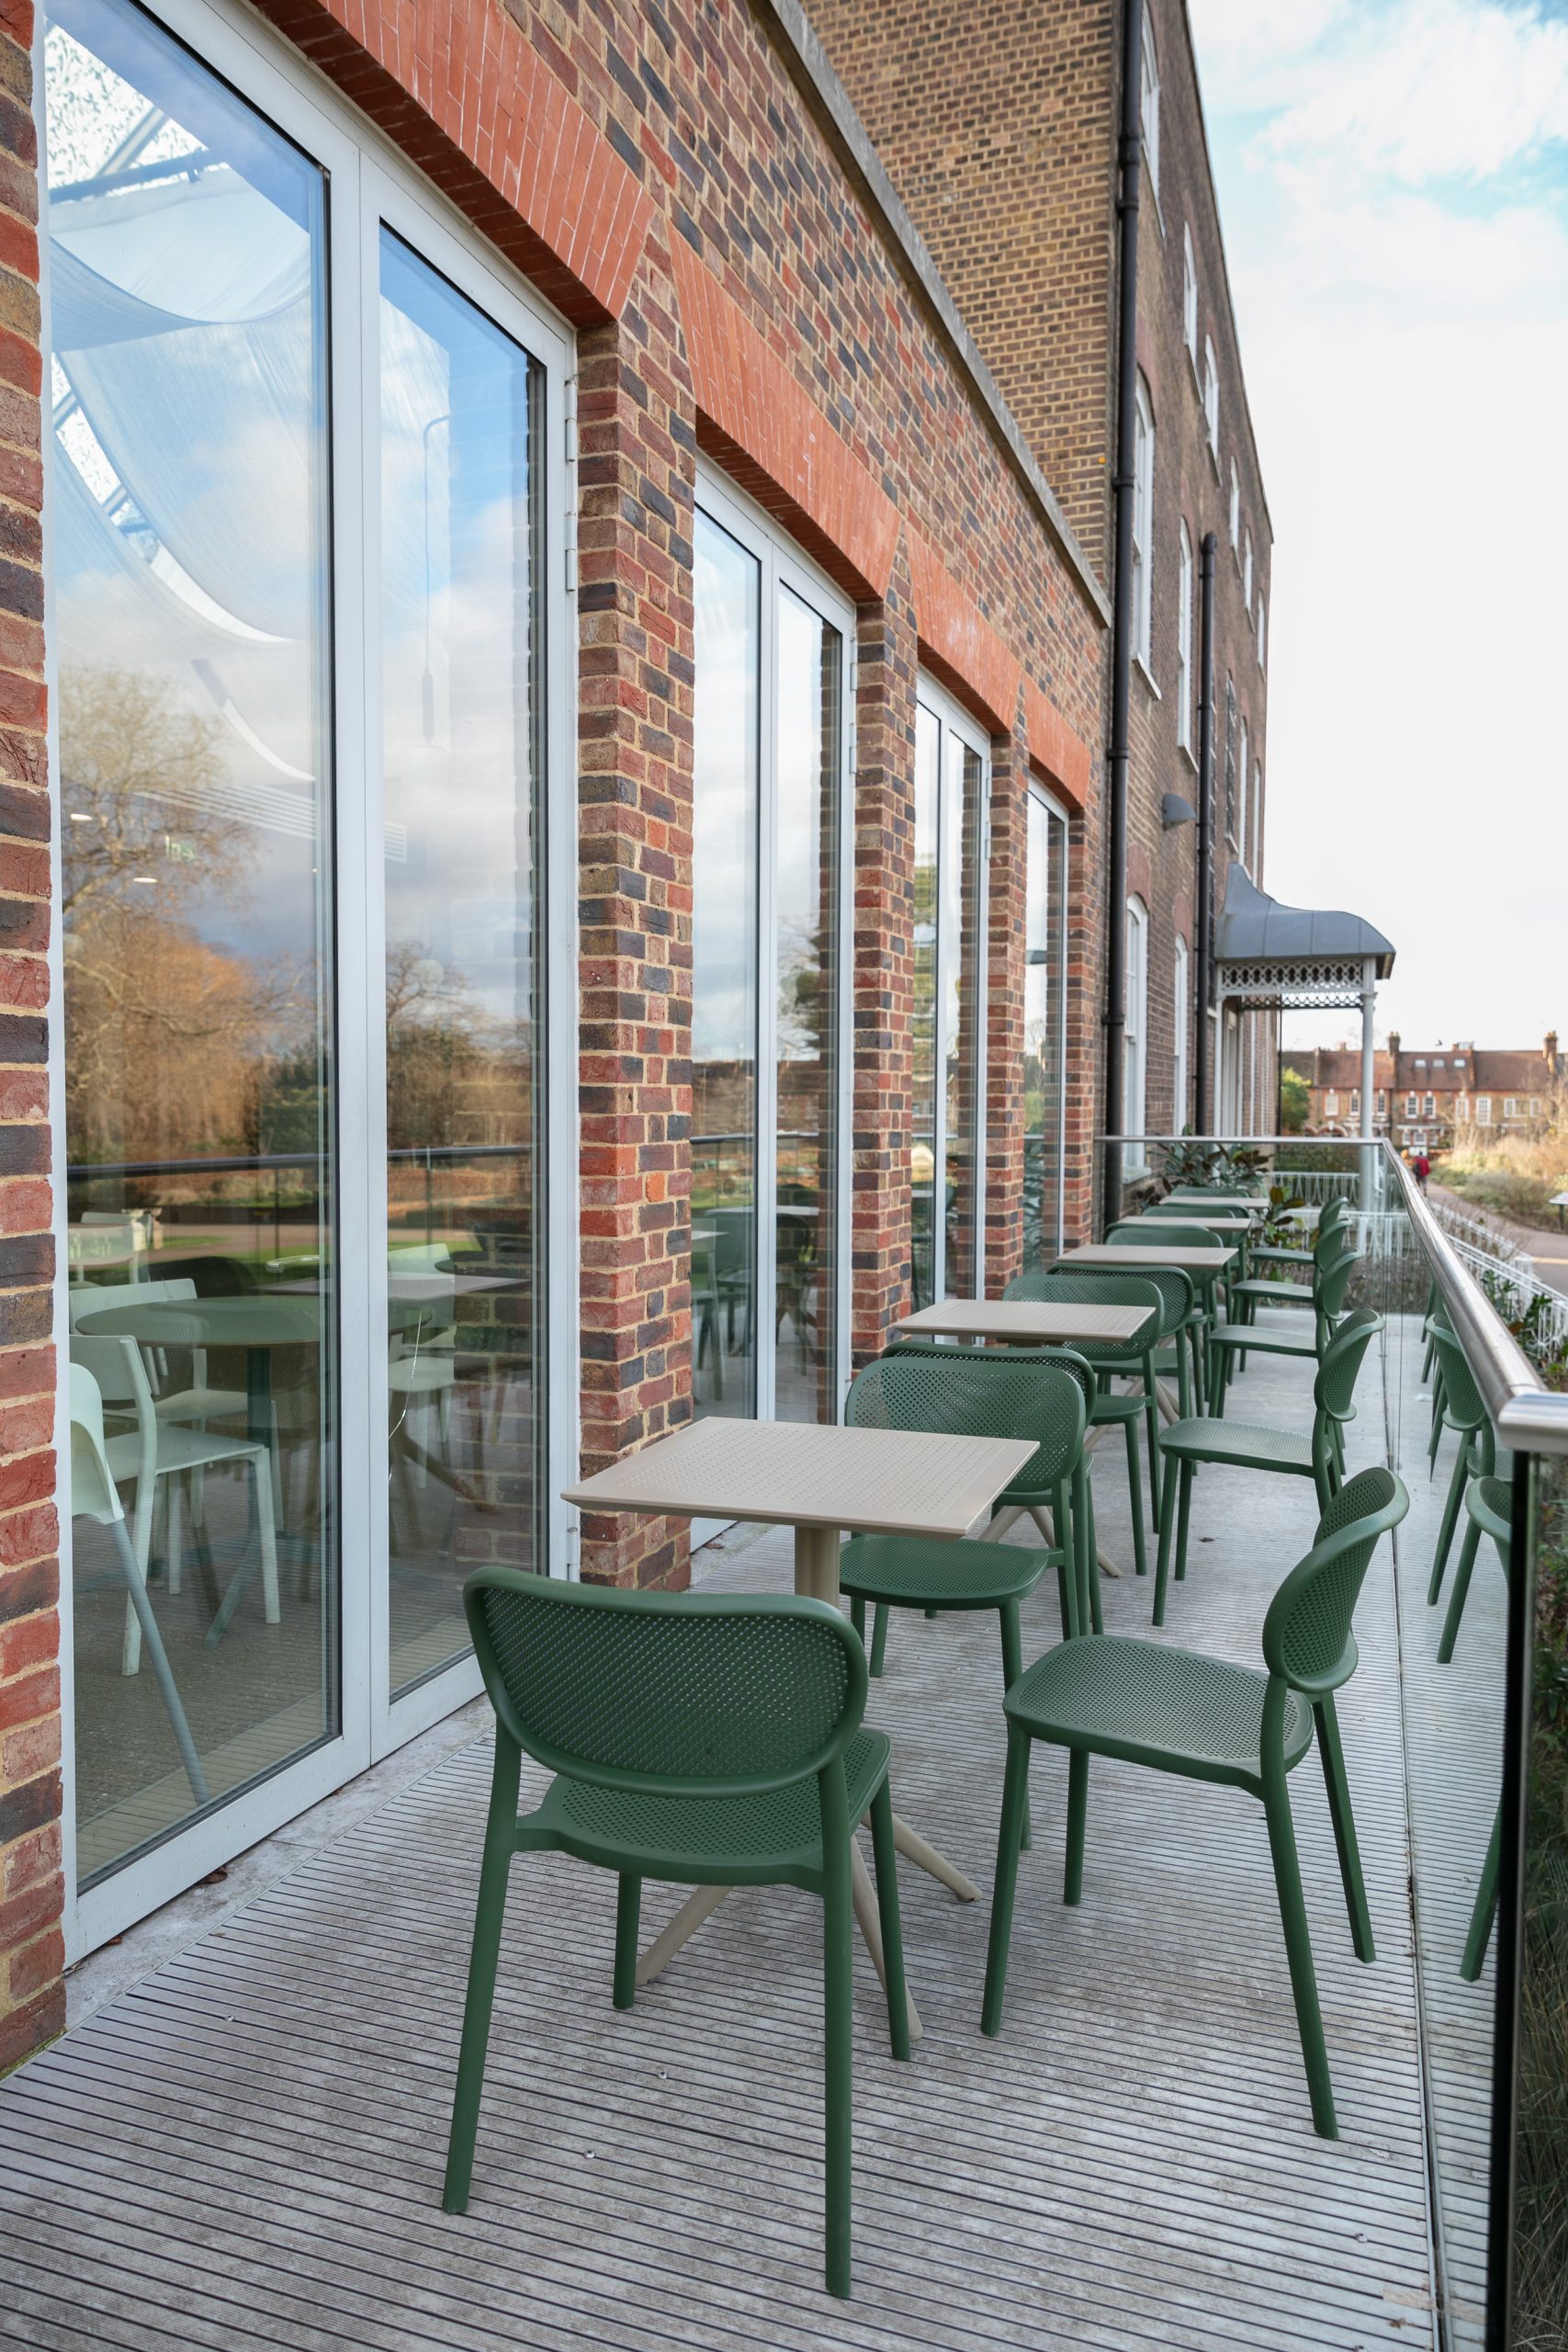 Outdoor terrace at William Morris Galllery Cafe